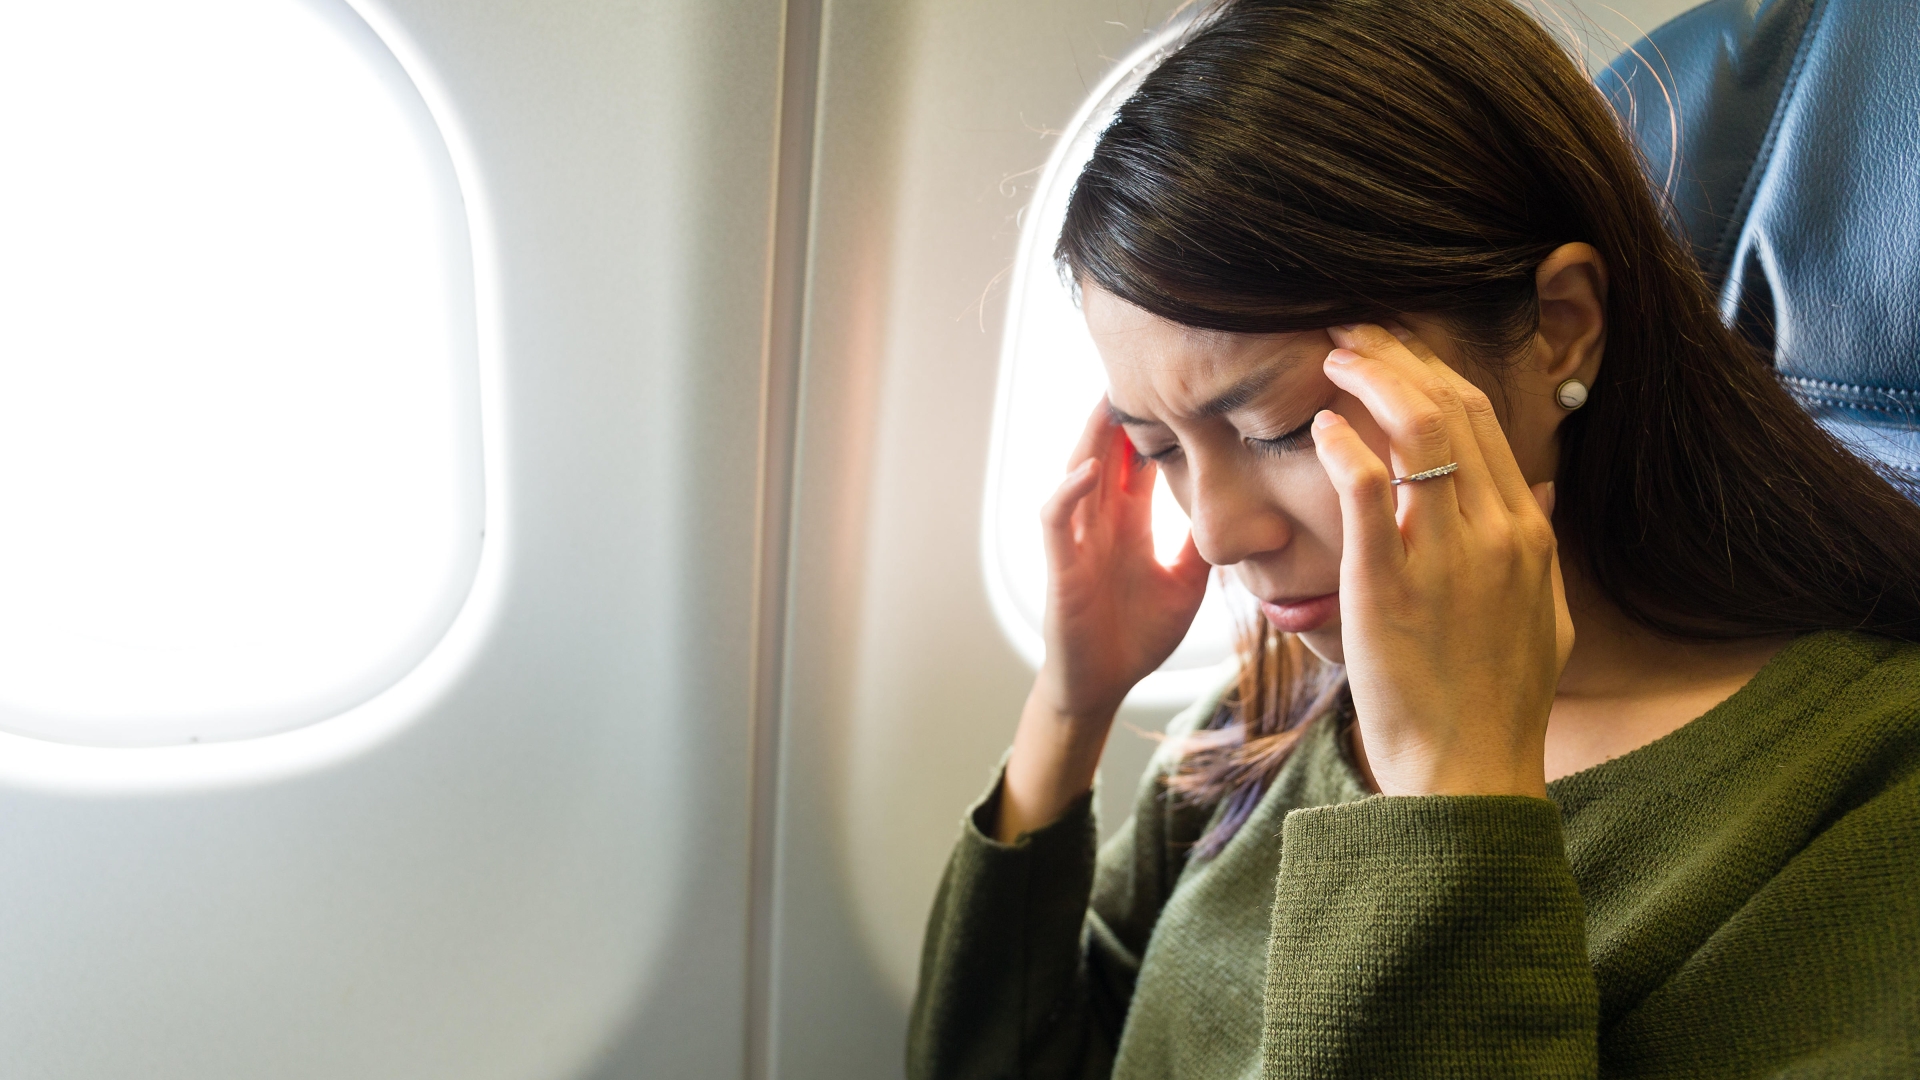 After being forced from her seat on a plane, her grieving mum lashed out at the’most selfish people.